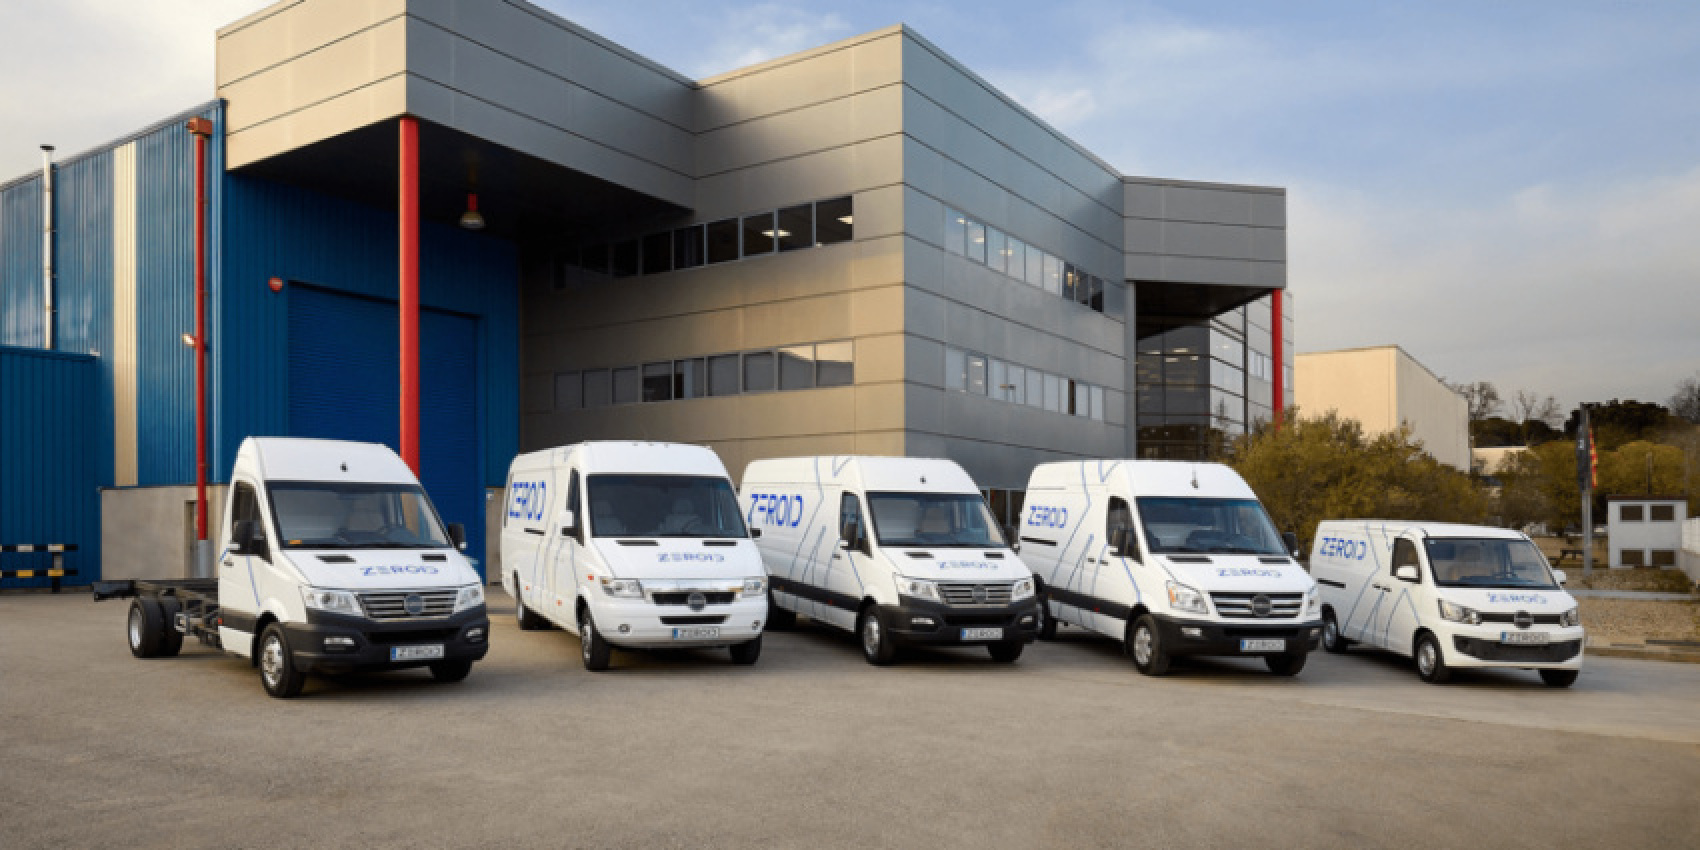 autos, cars, electric vehicle, nissan, utility vehicles, barcelona, electric buses, electric transporters, qev technologies, spain, zeroid, qev to build electric transporters at former nissan plant